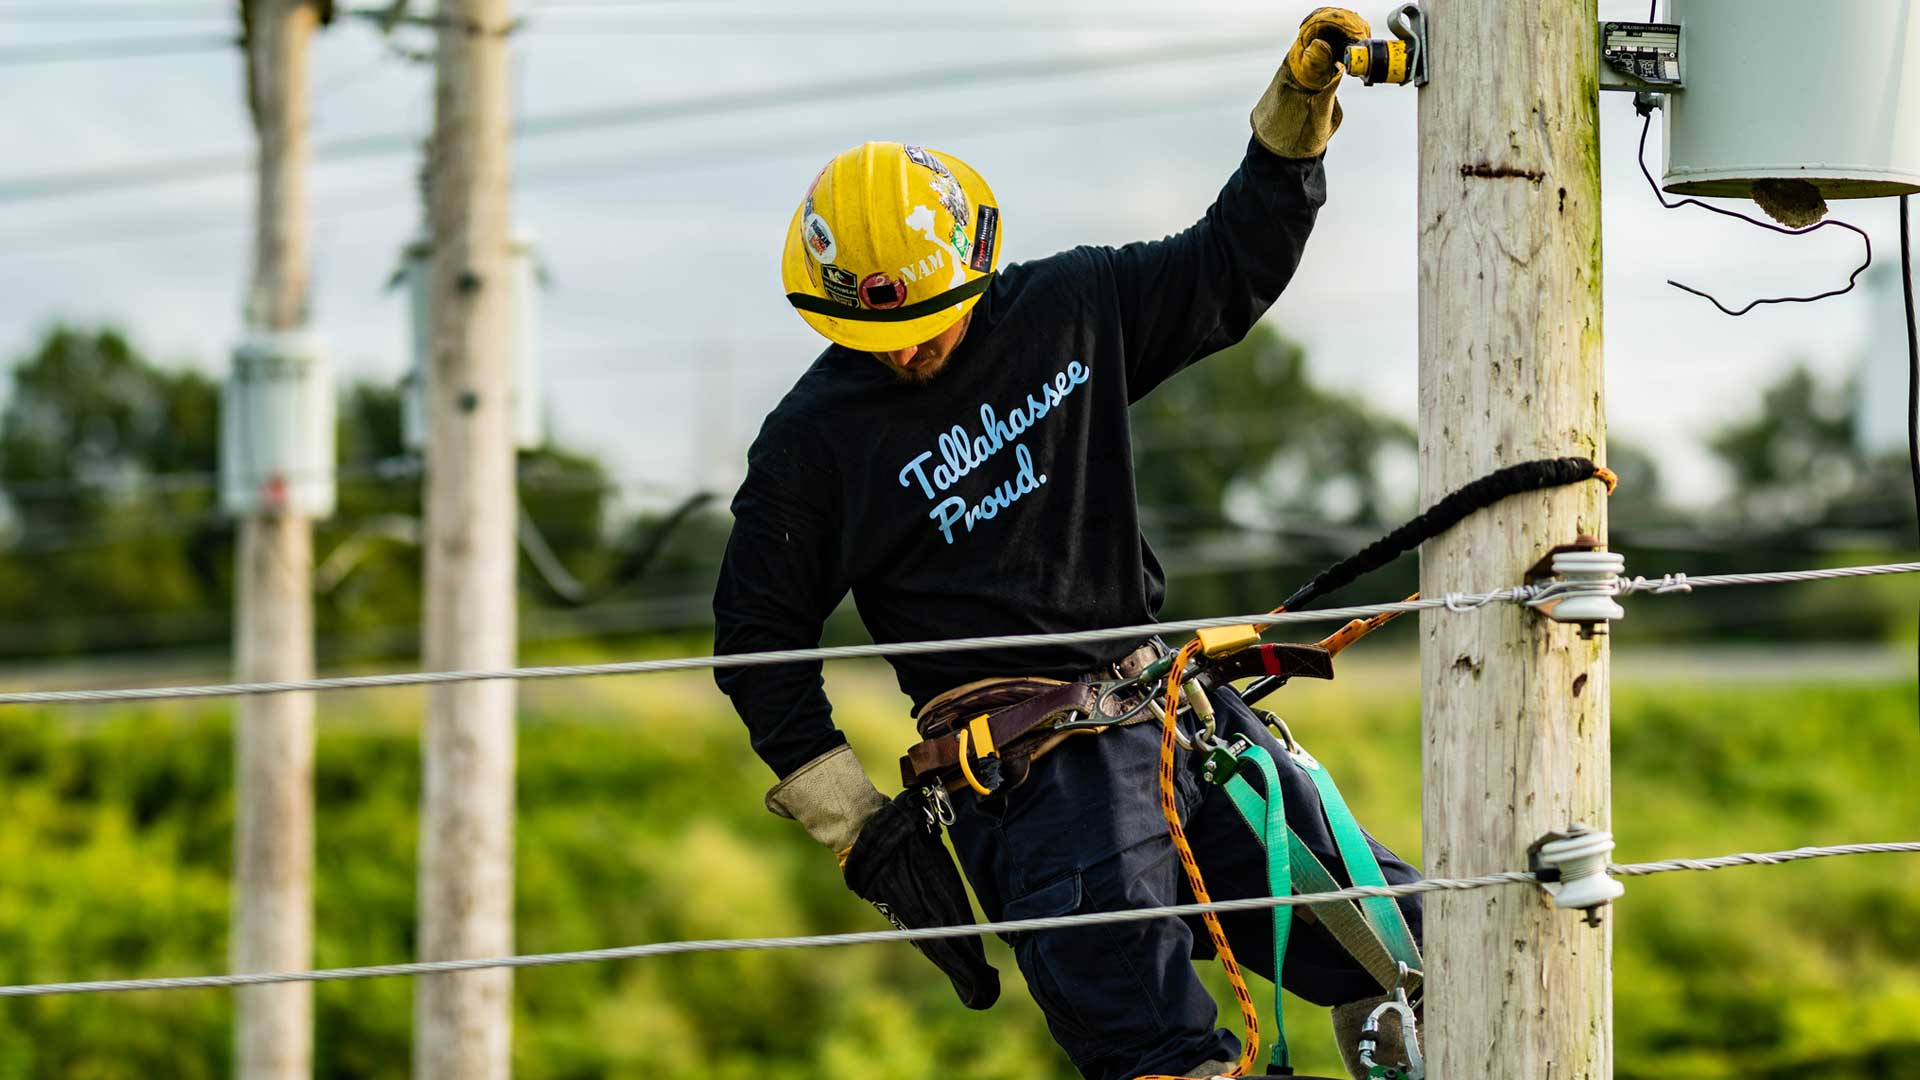 A lineman wearing a Tallahassee Proud shirt works on an electrical pole.